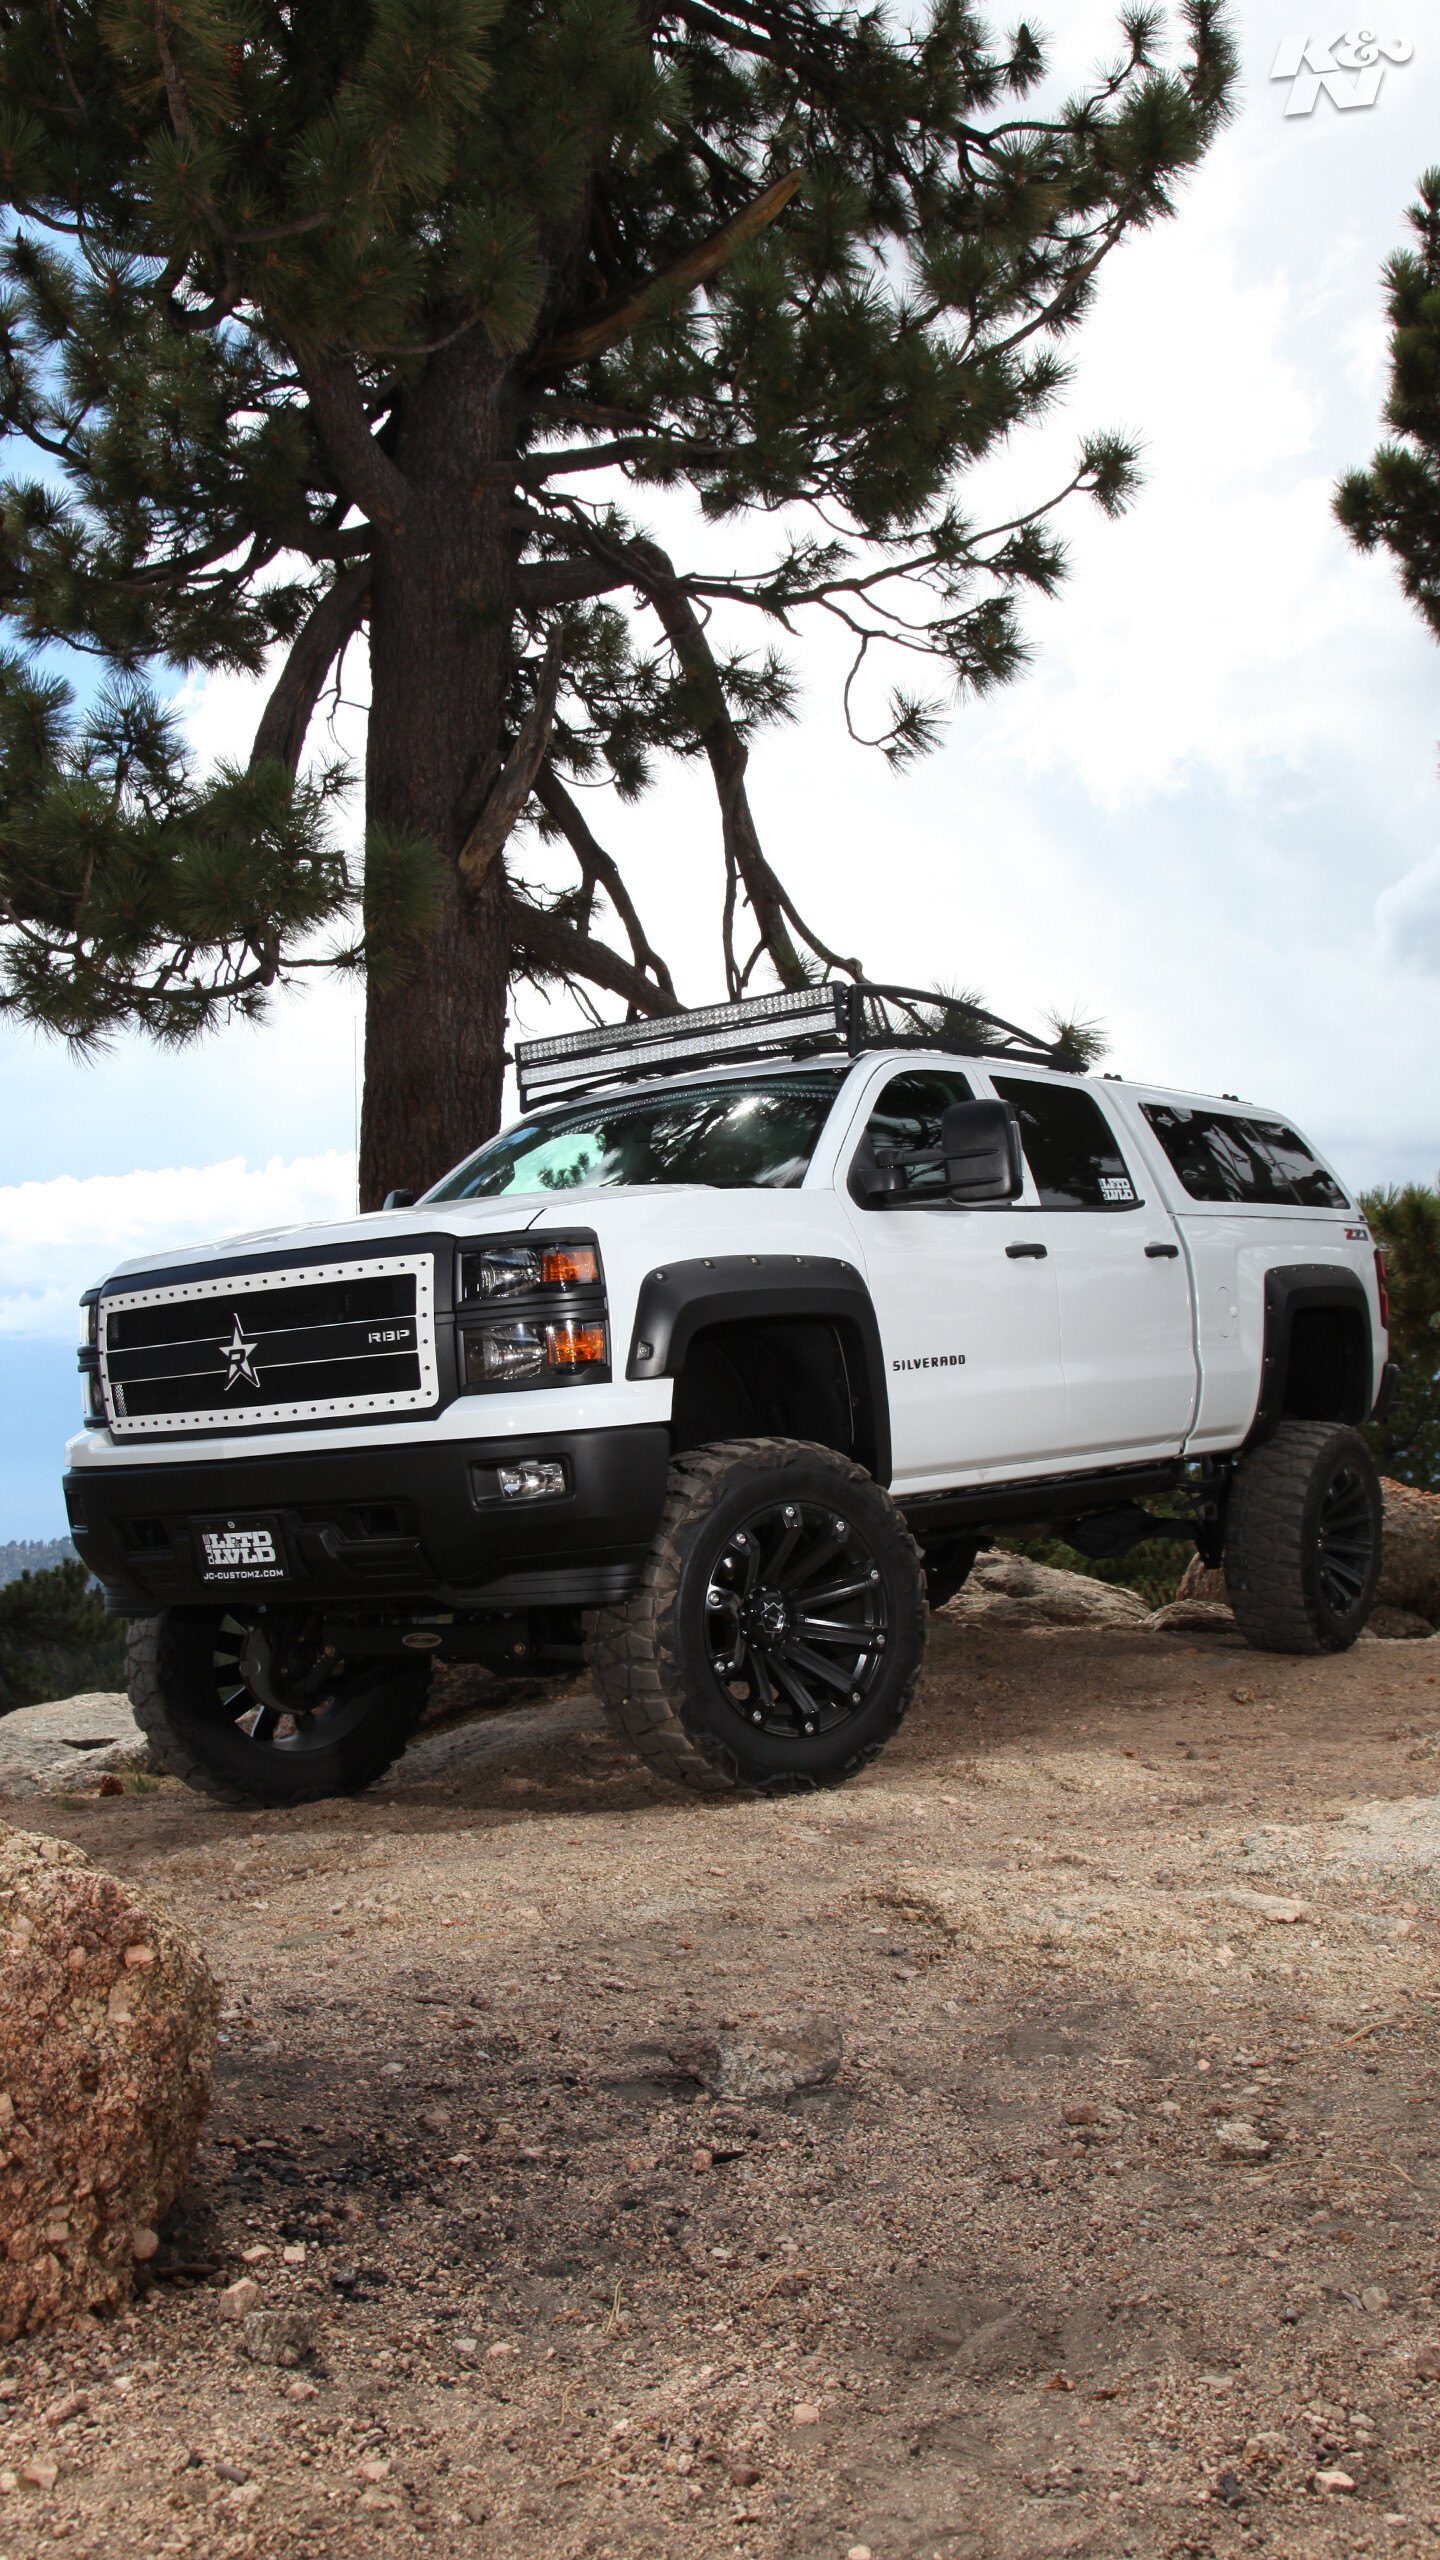 Chevrolet Silverado: The third best-selling pick-up in America, behind the Ford F-Series and the Ram pickup. 1440x2560 HD Wallpaper.